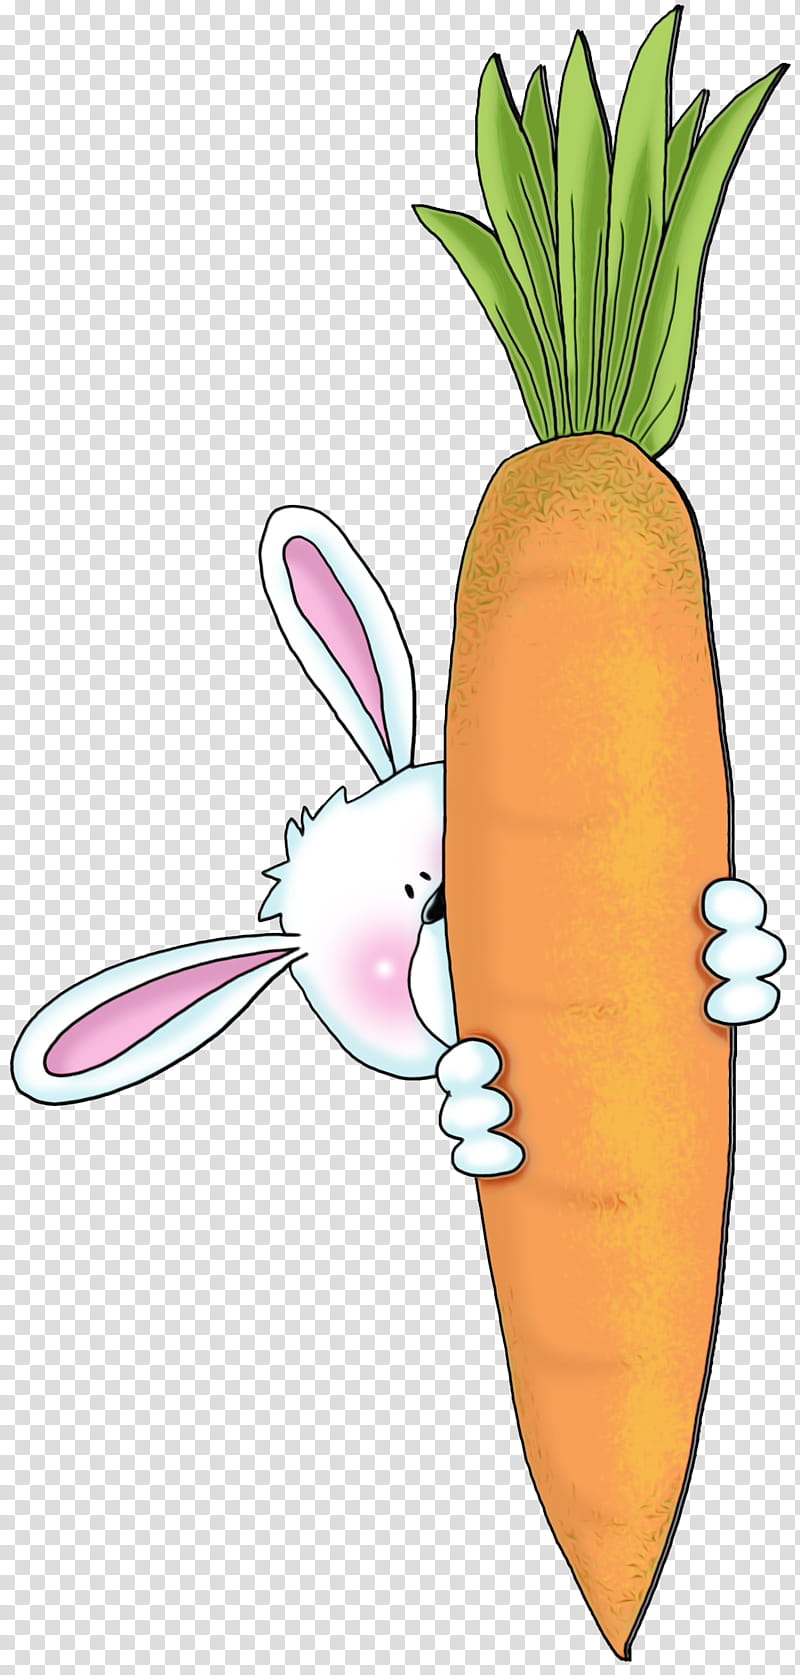 carrot radish root vegetable vegetable daikon, Watercolor, Paint, Wet Ink, Cartoon, Baby Carrot, Plant, Wild Carrot transparent background PNG clipart